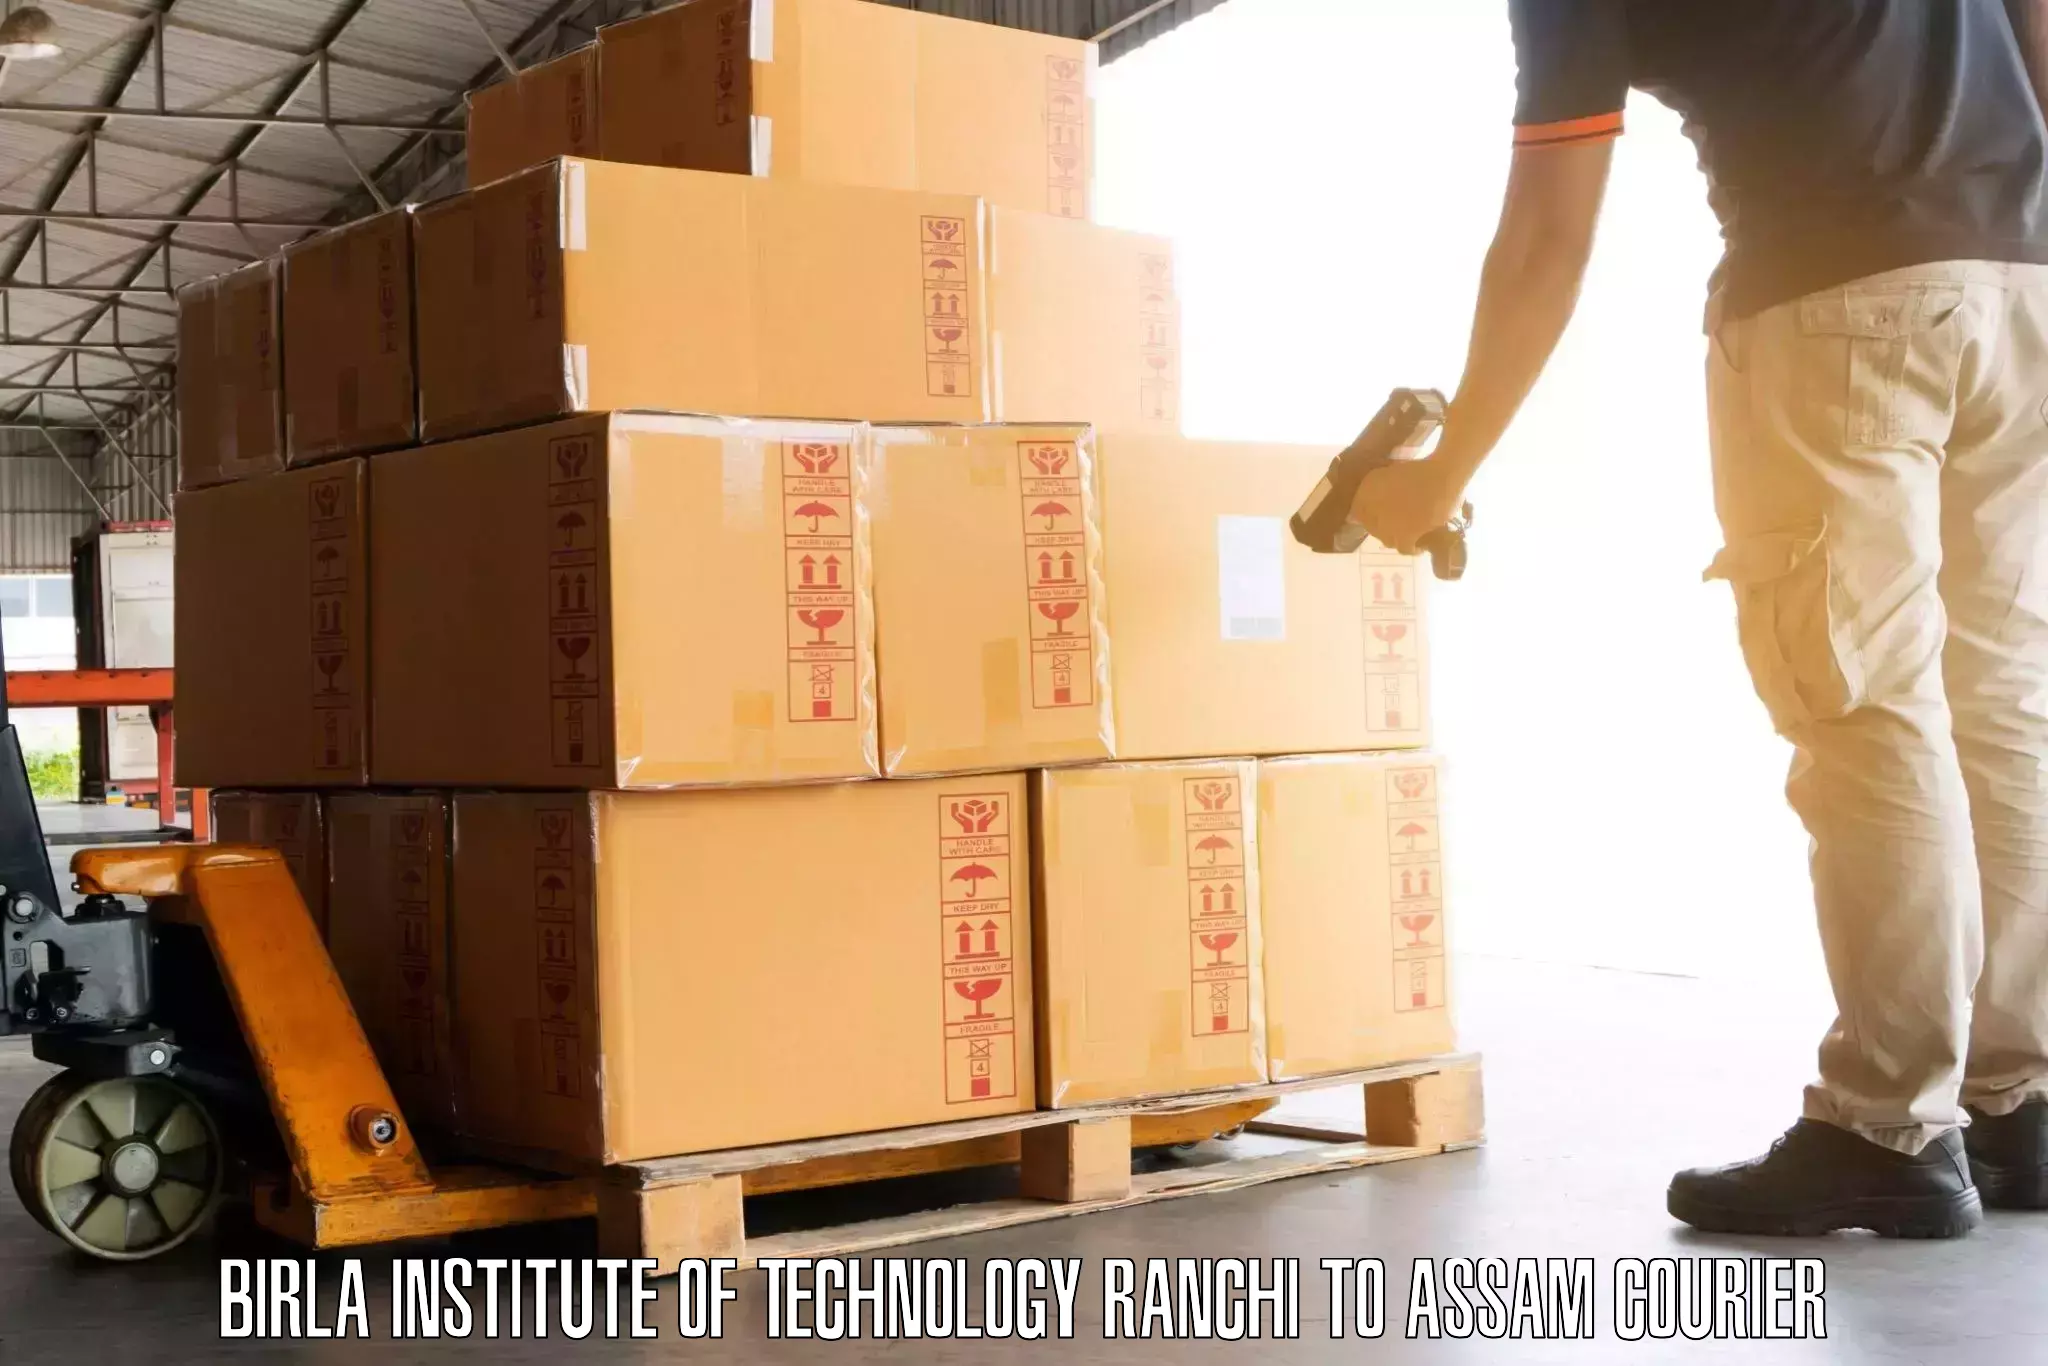 Luggage delivery network Birla Institute of Technology Ranchi to IIIT Guwahati